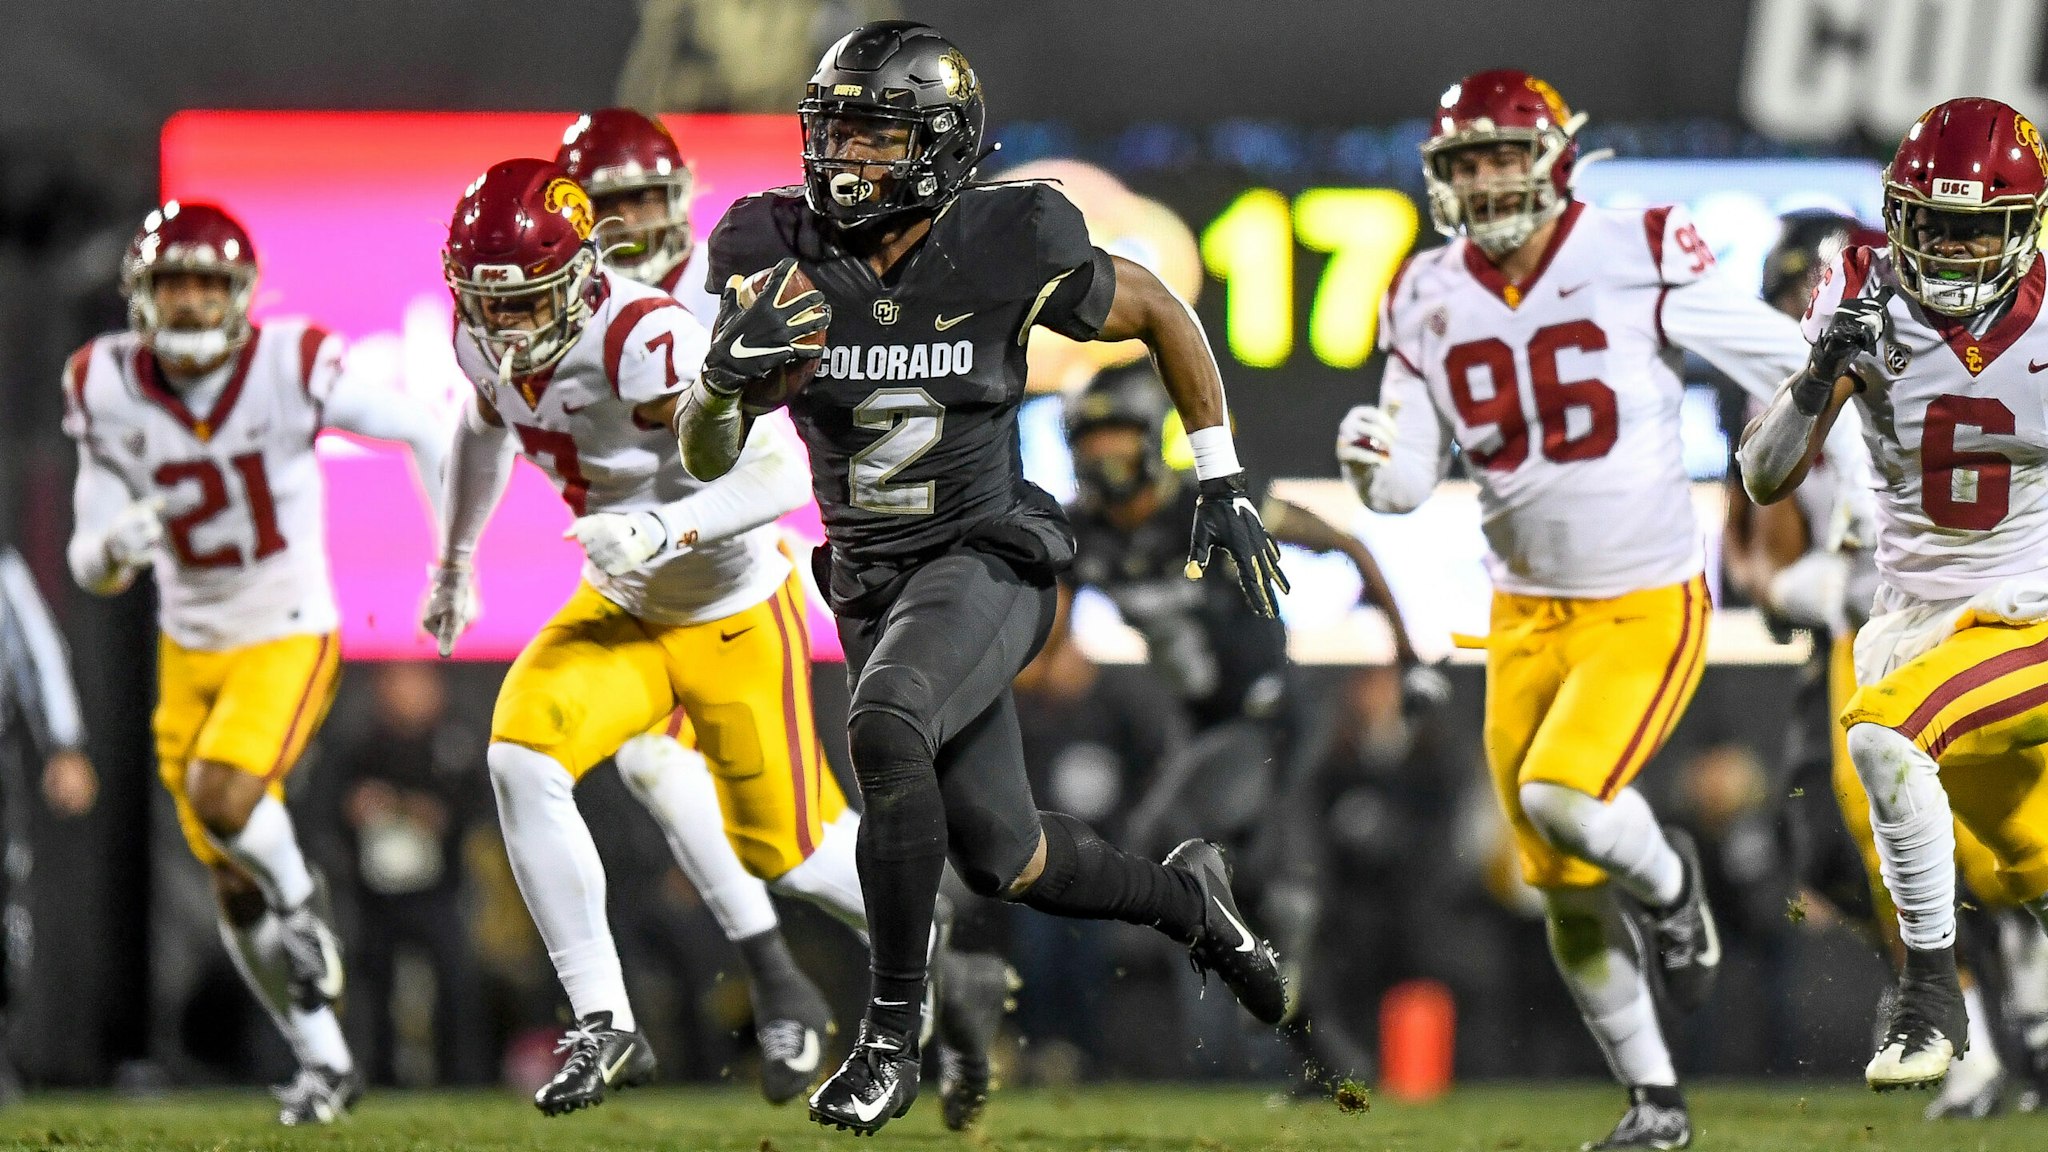 BOULDER, CO - OCTOBER 25: Laviska Shenault Jr. #2 of the Colorado Buffaloes carries the ball for a 73-yard touchdown catch against the USC Trojans in the third quarter of a game at Folsom Field on October 25, 2019 in Boulder, Colorado.